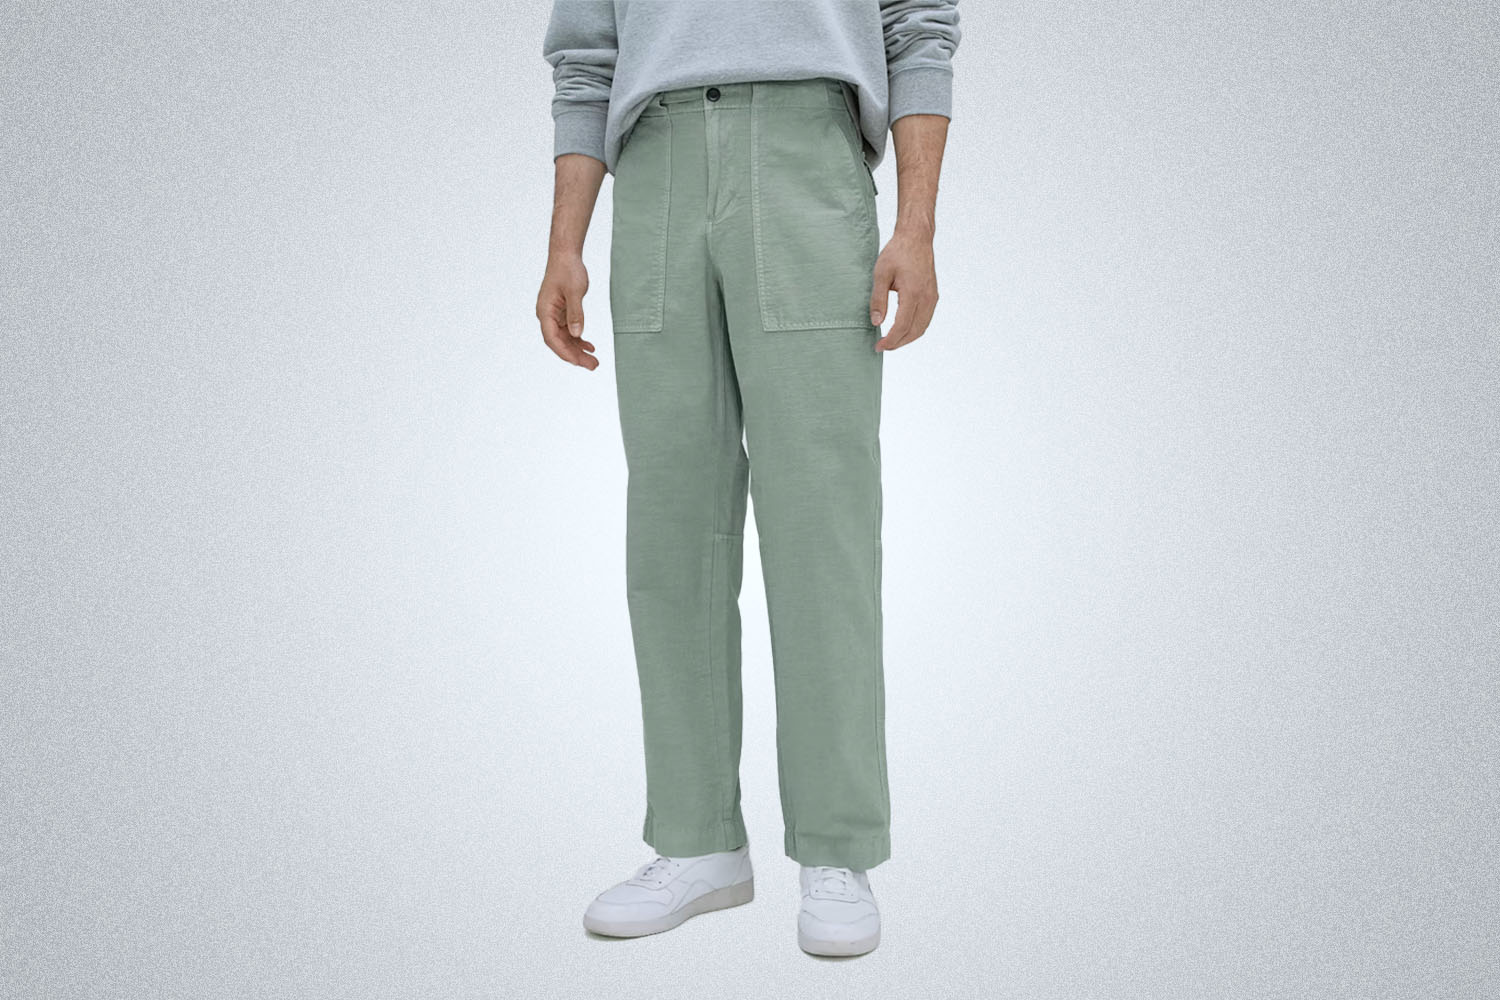 a model in a pair of Everlane utility pants on a grey background